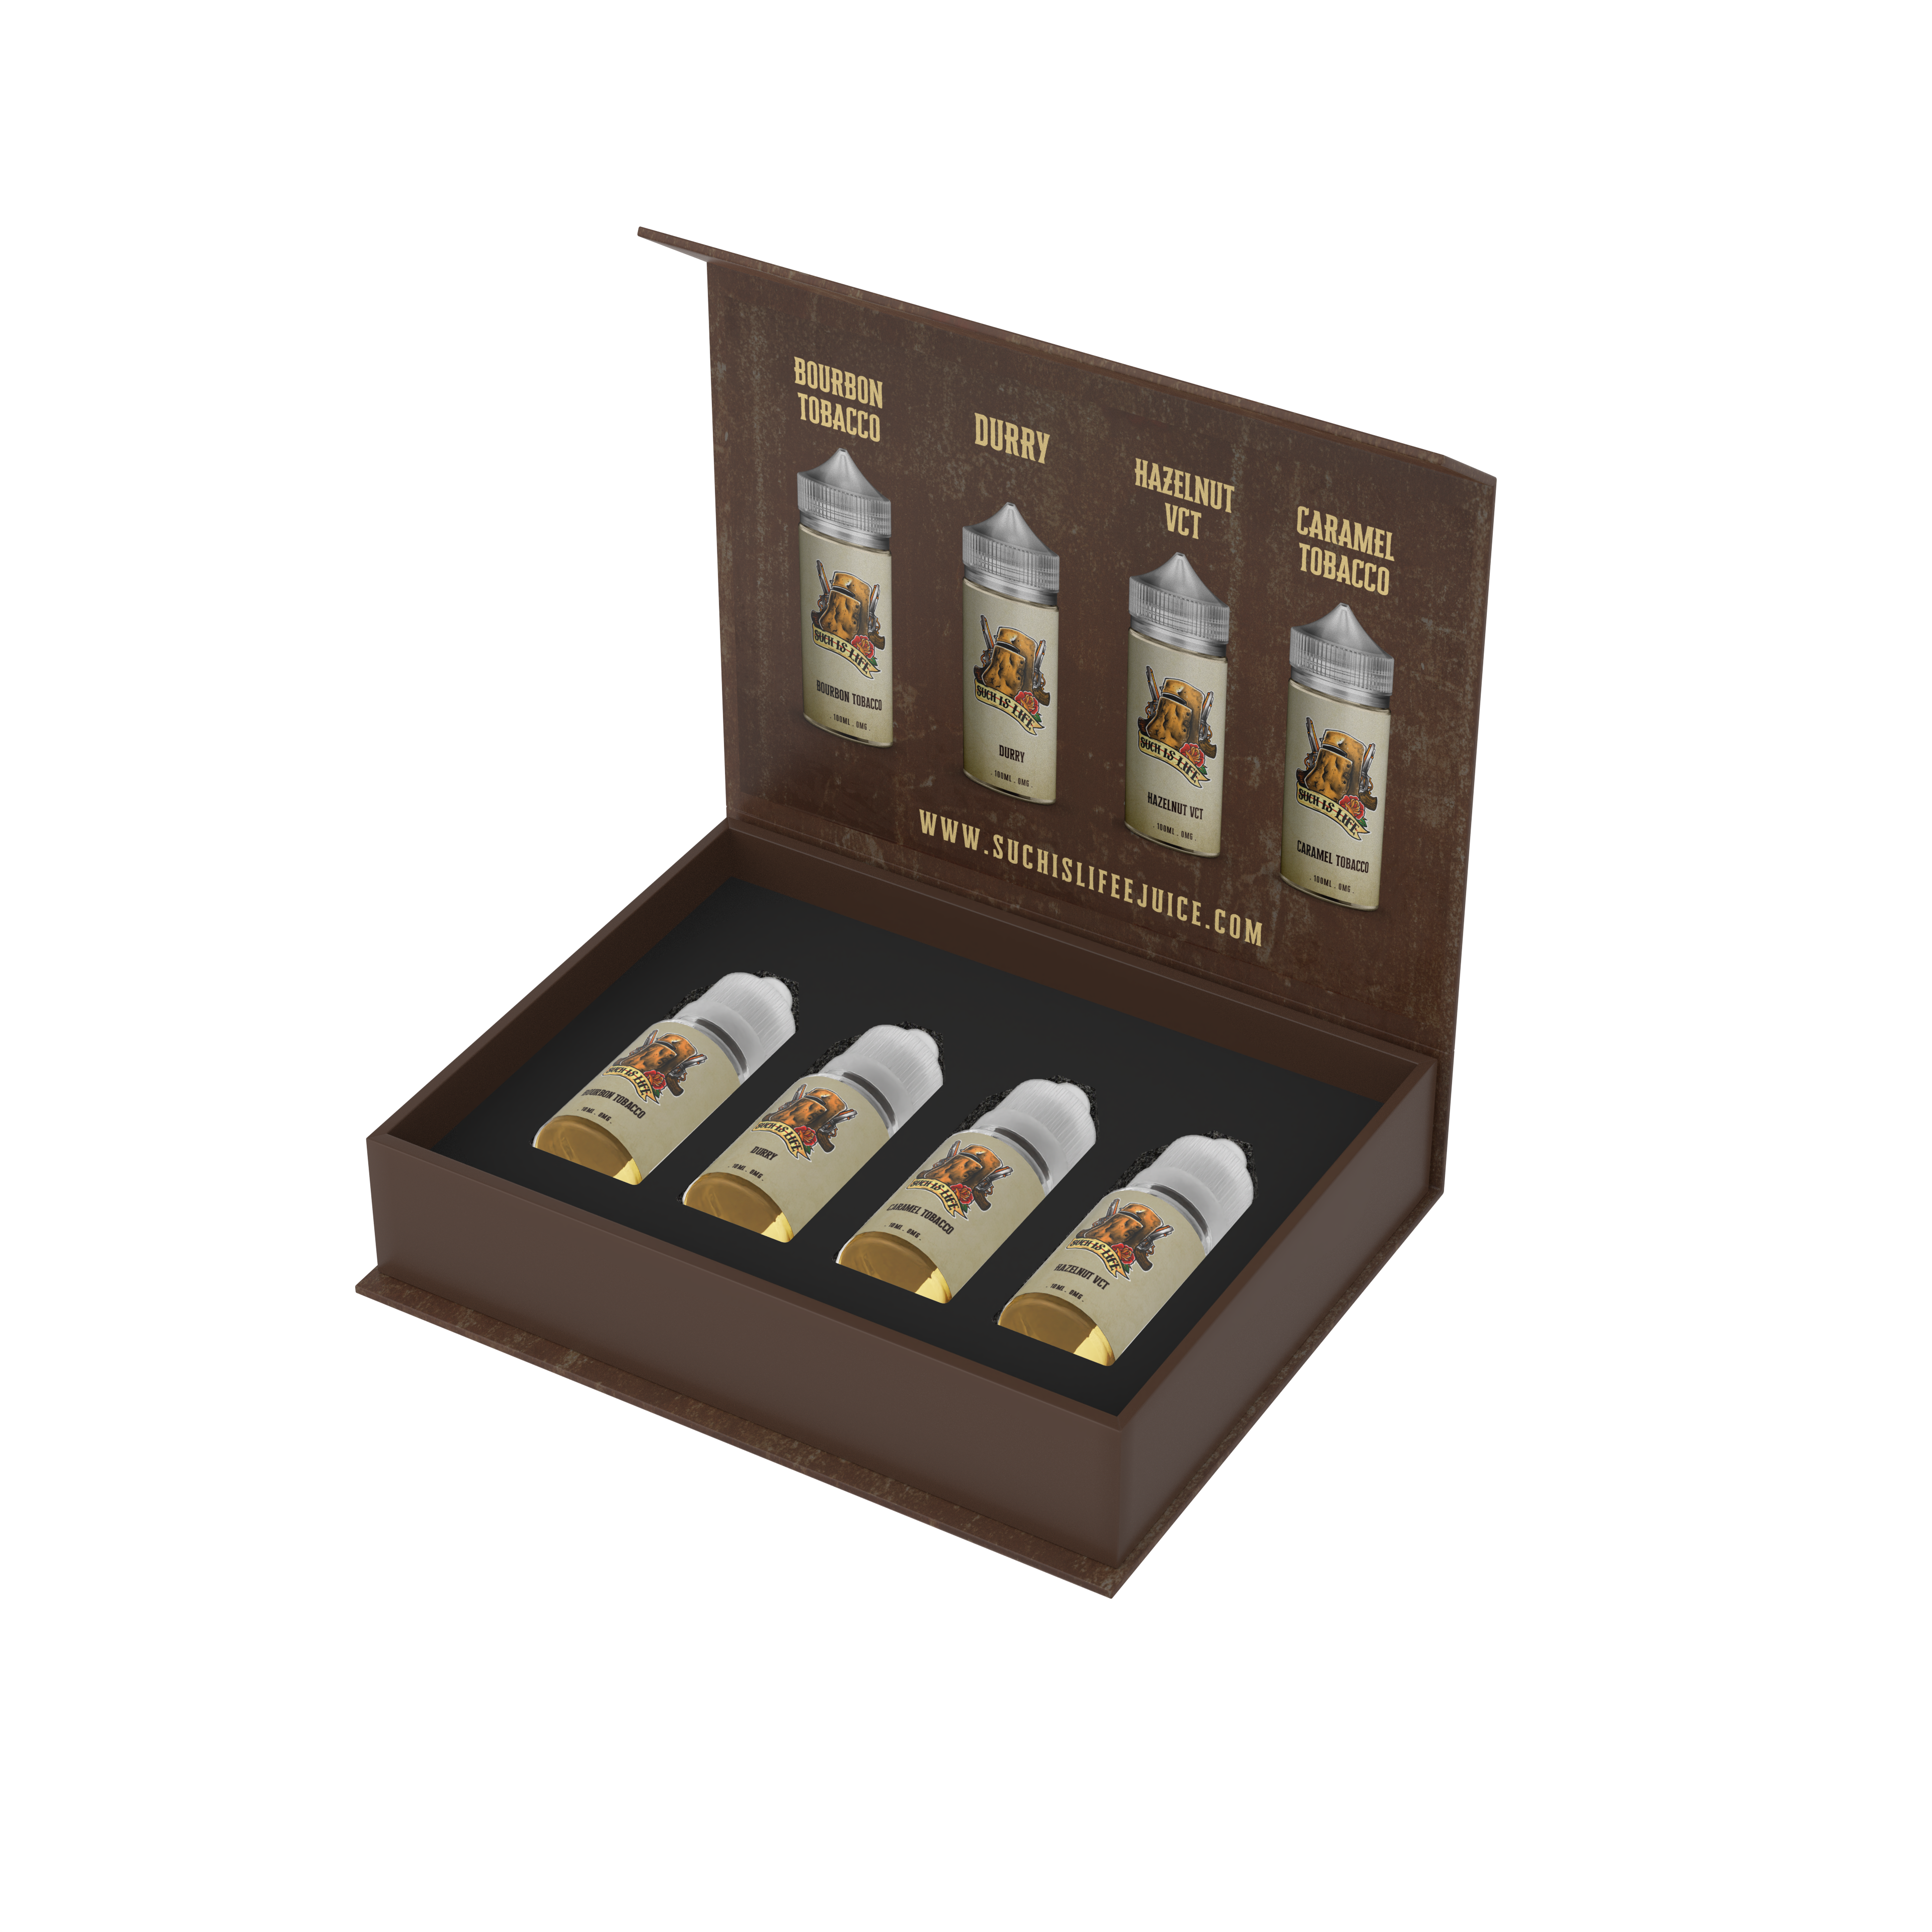 Such is Life | 10ml | Sample Box | Wholesale